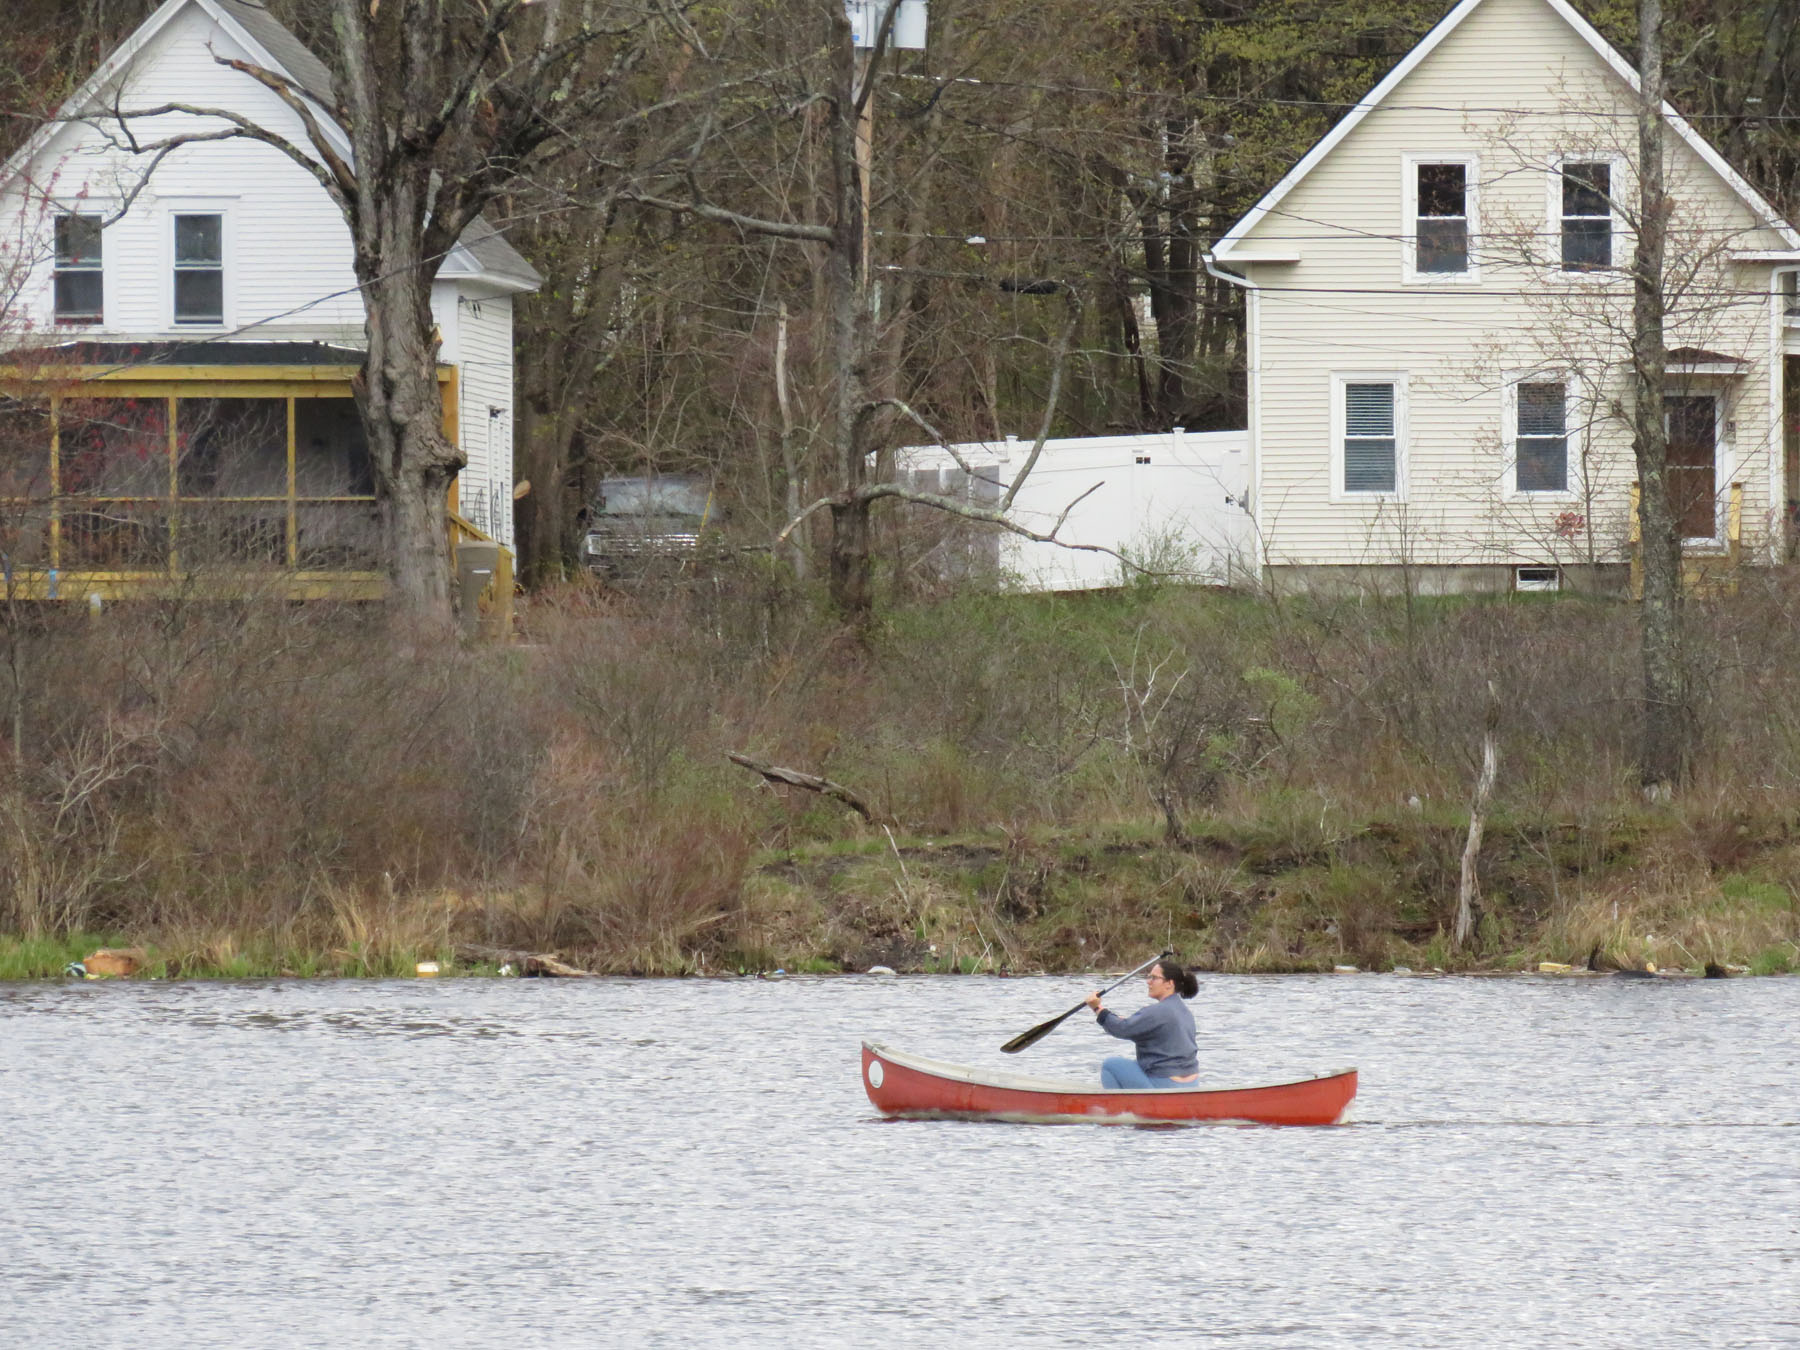 Kayaker on Tannery Pond